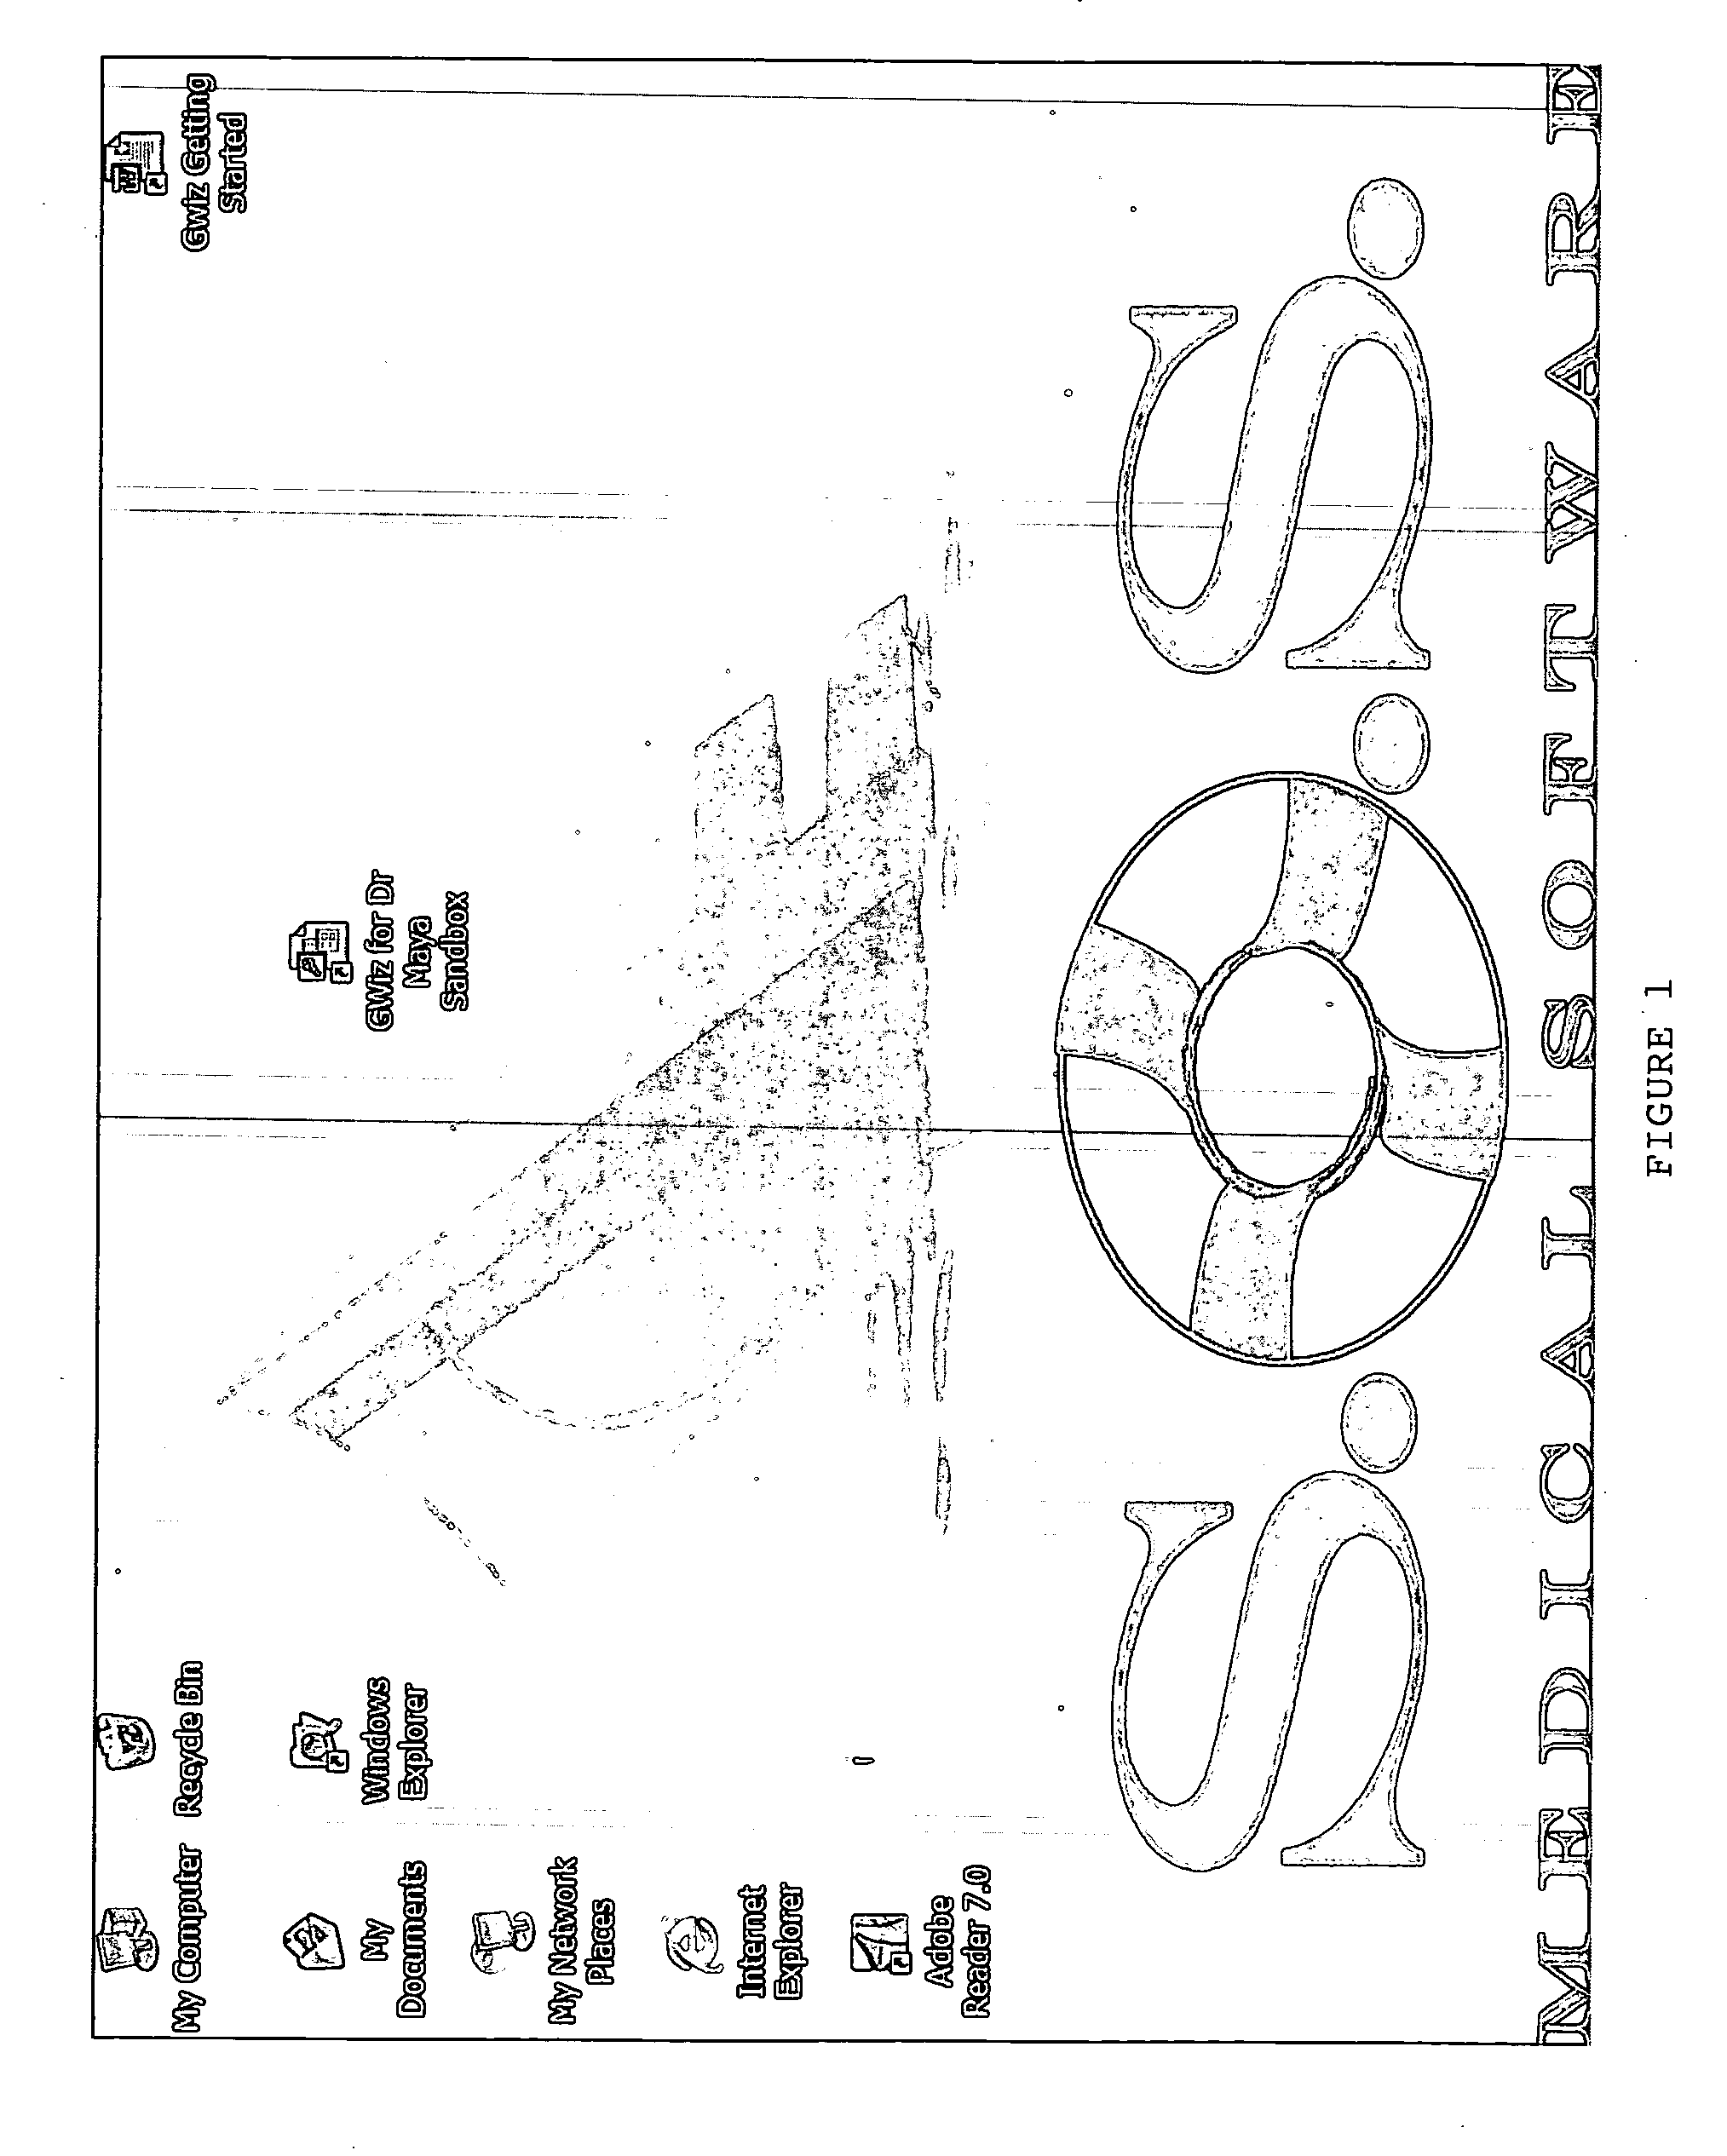 Method, system and computer program product for generating an electronic bill having optimized insurance claim items